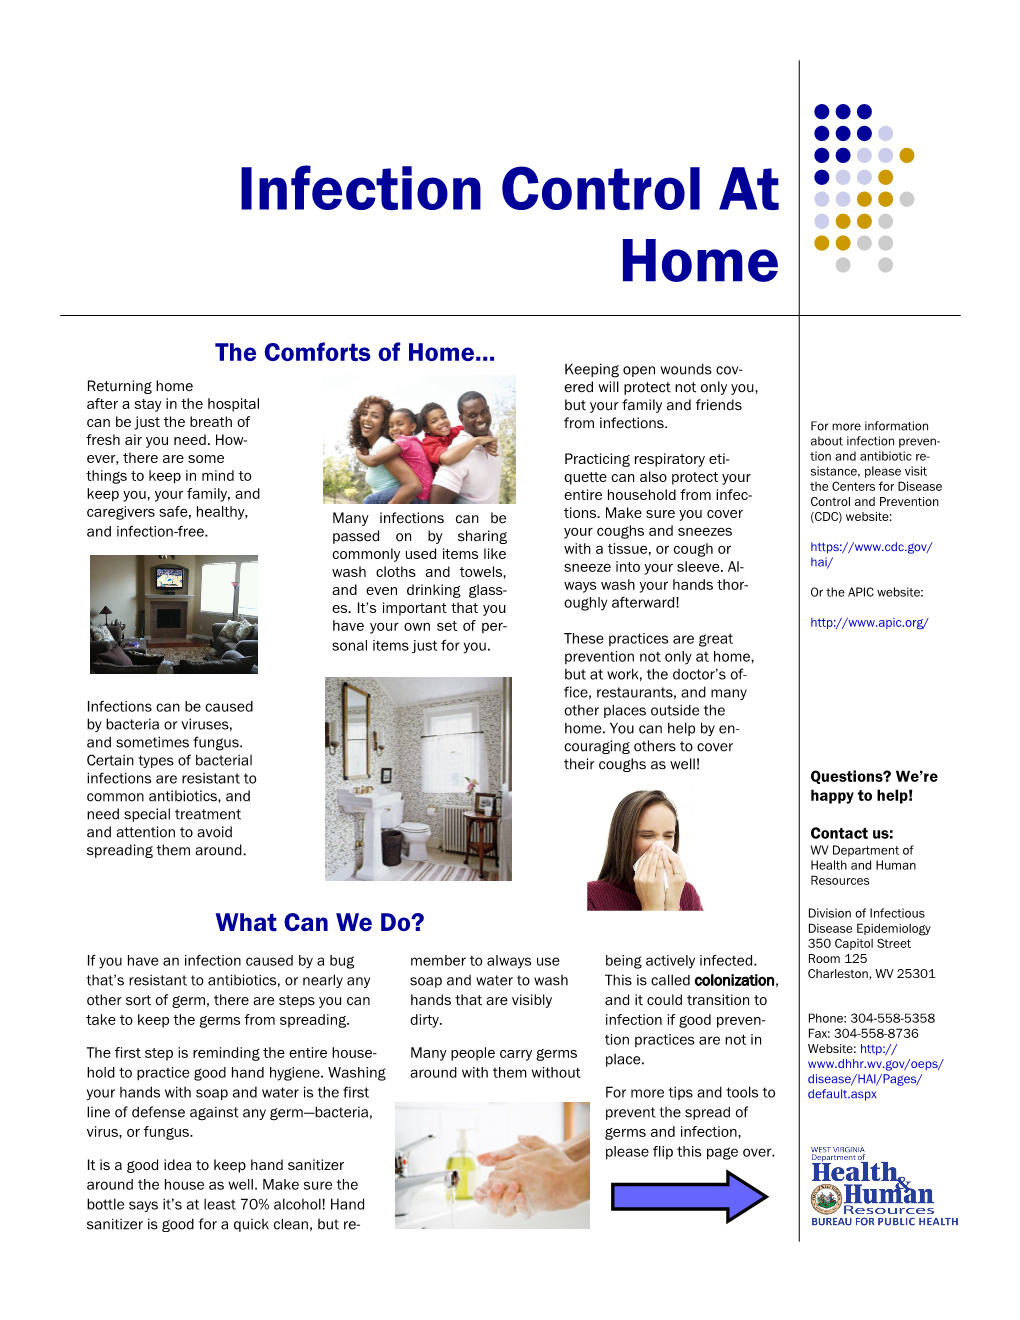 Infection Control at Home